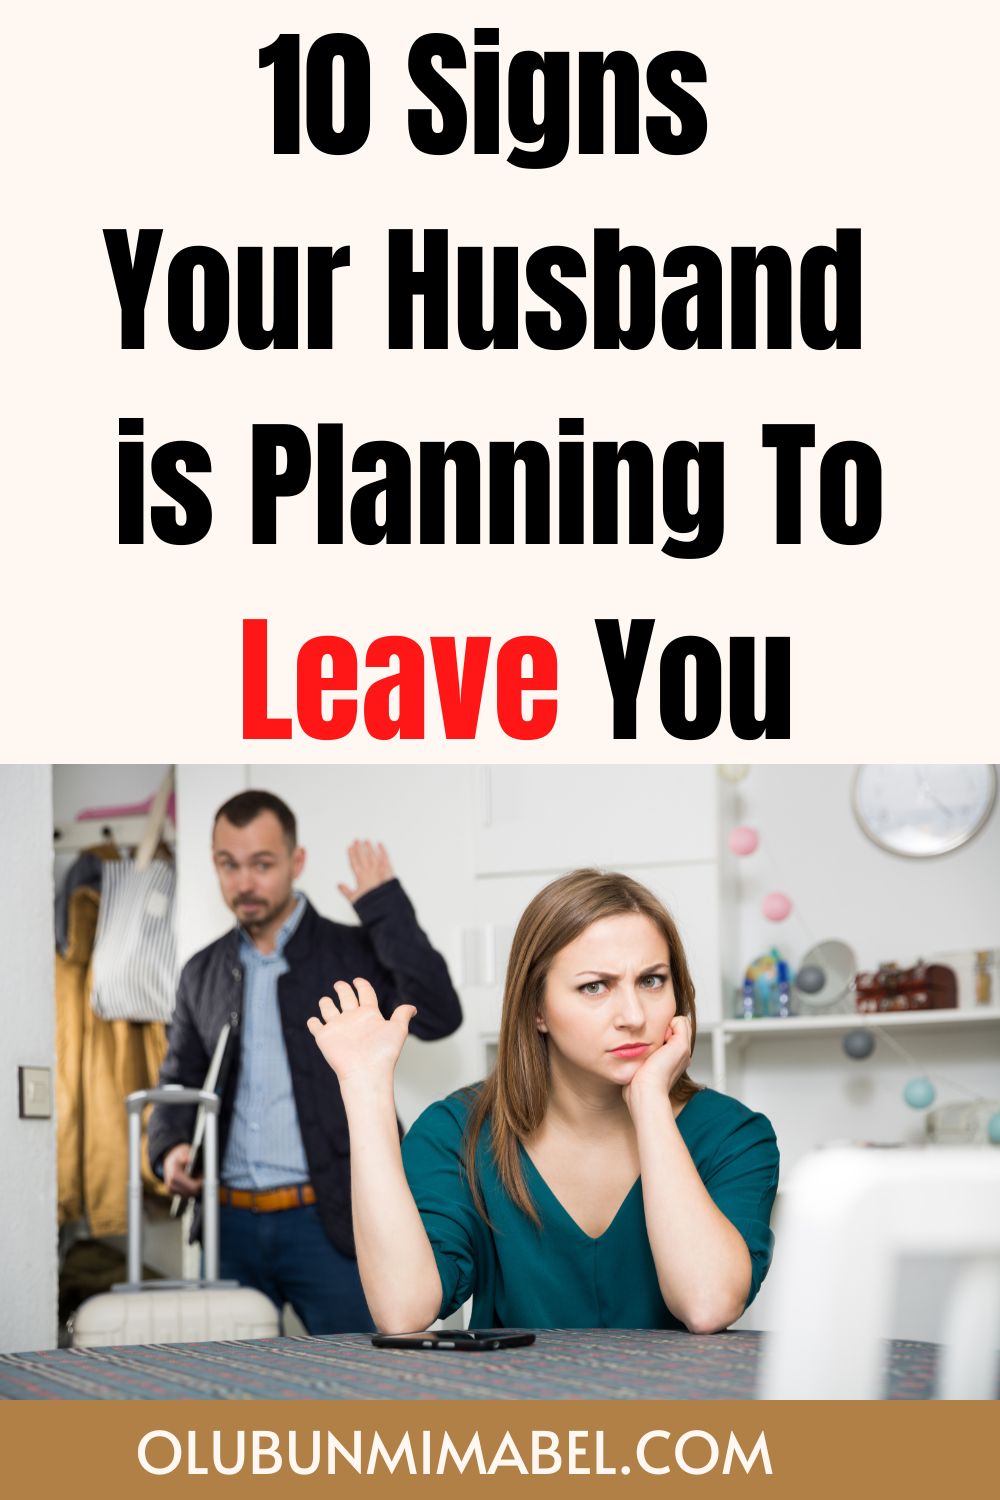 Signs Your Husband Is Planning To Leave You